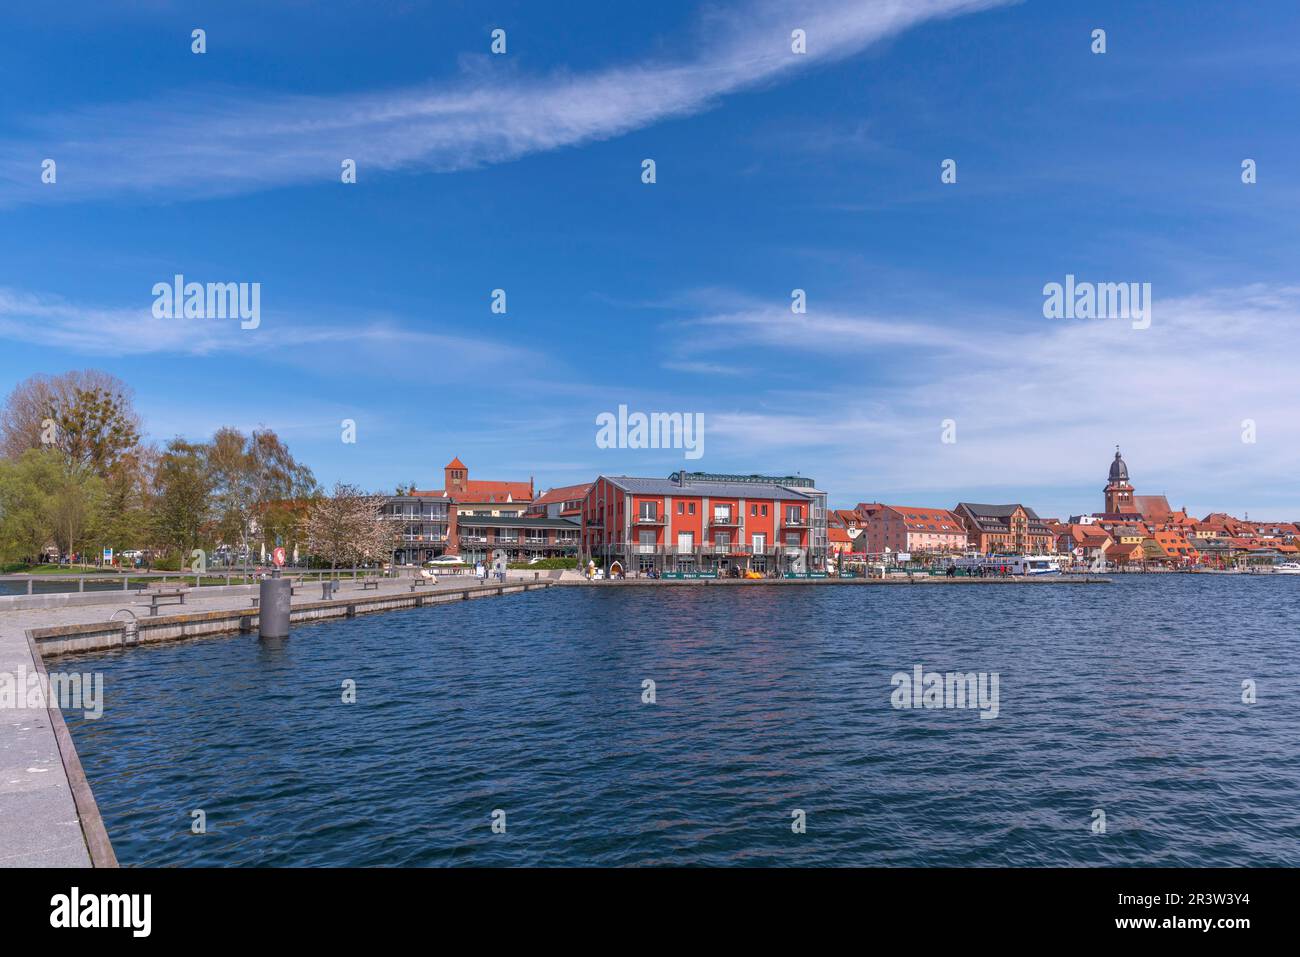 City harbour, Waren, St. George's Church, panorama, evening light, sky, Mecklemburg Lake District, old town, Mecklenburg-Western Pomerania, Germany Stock Photo